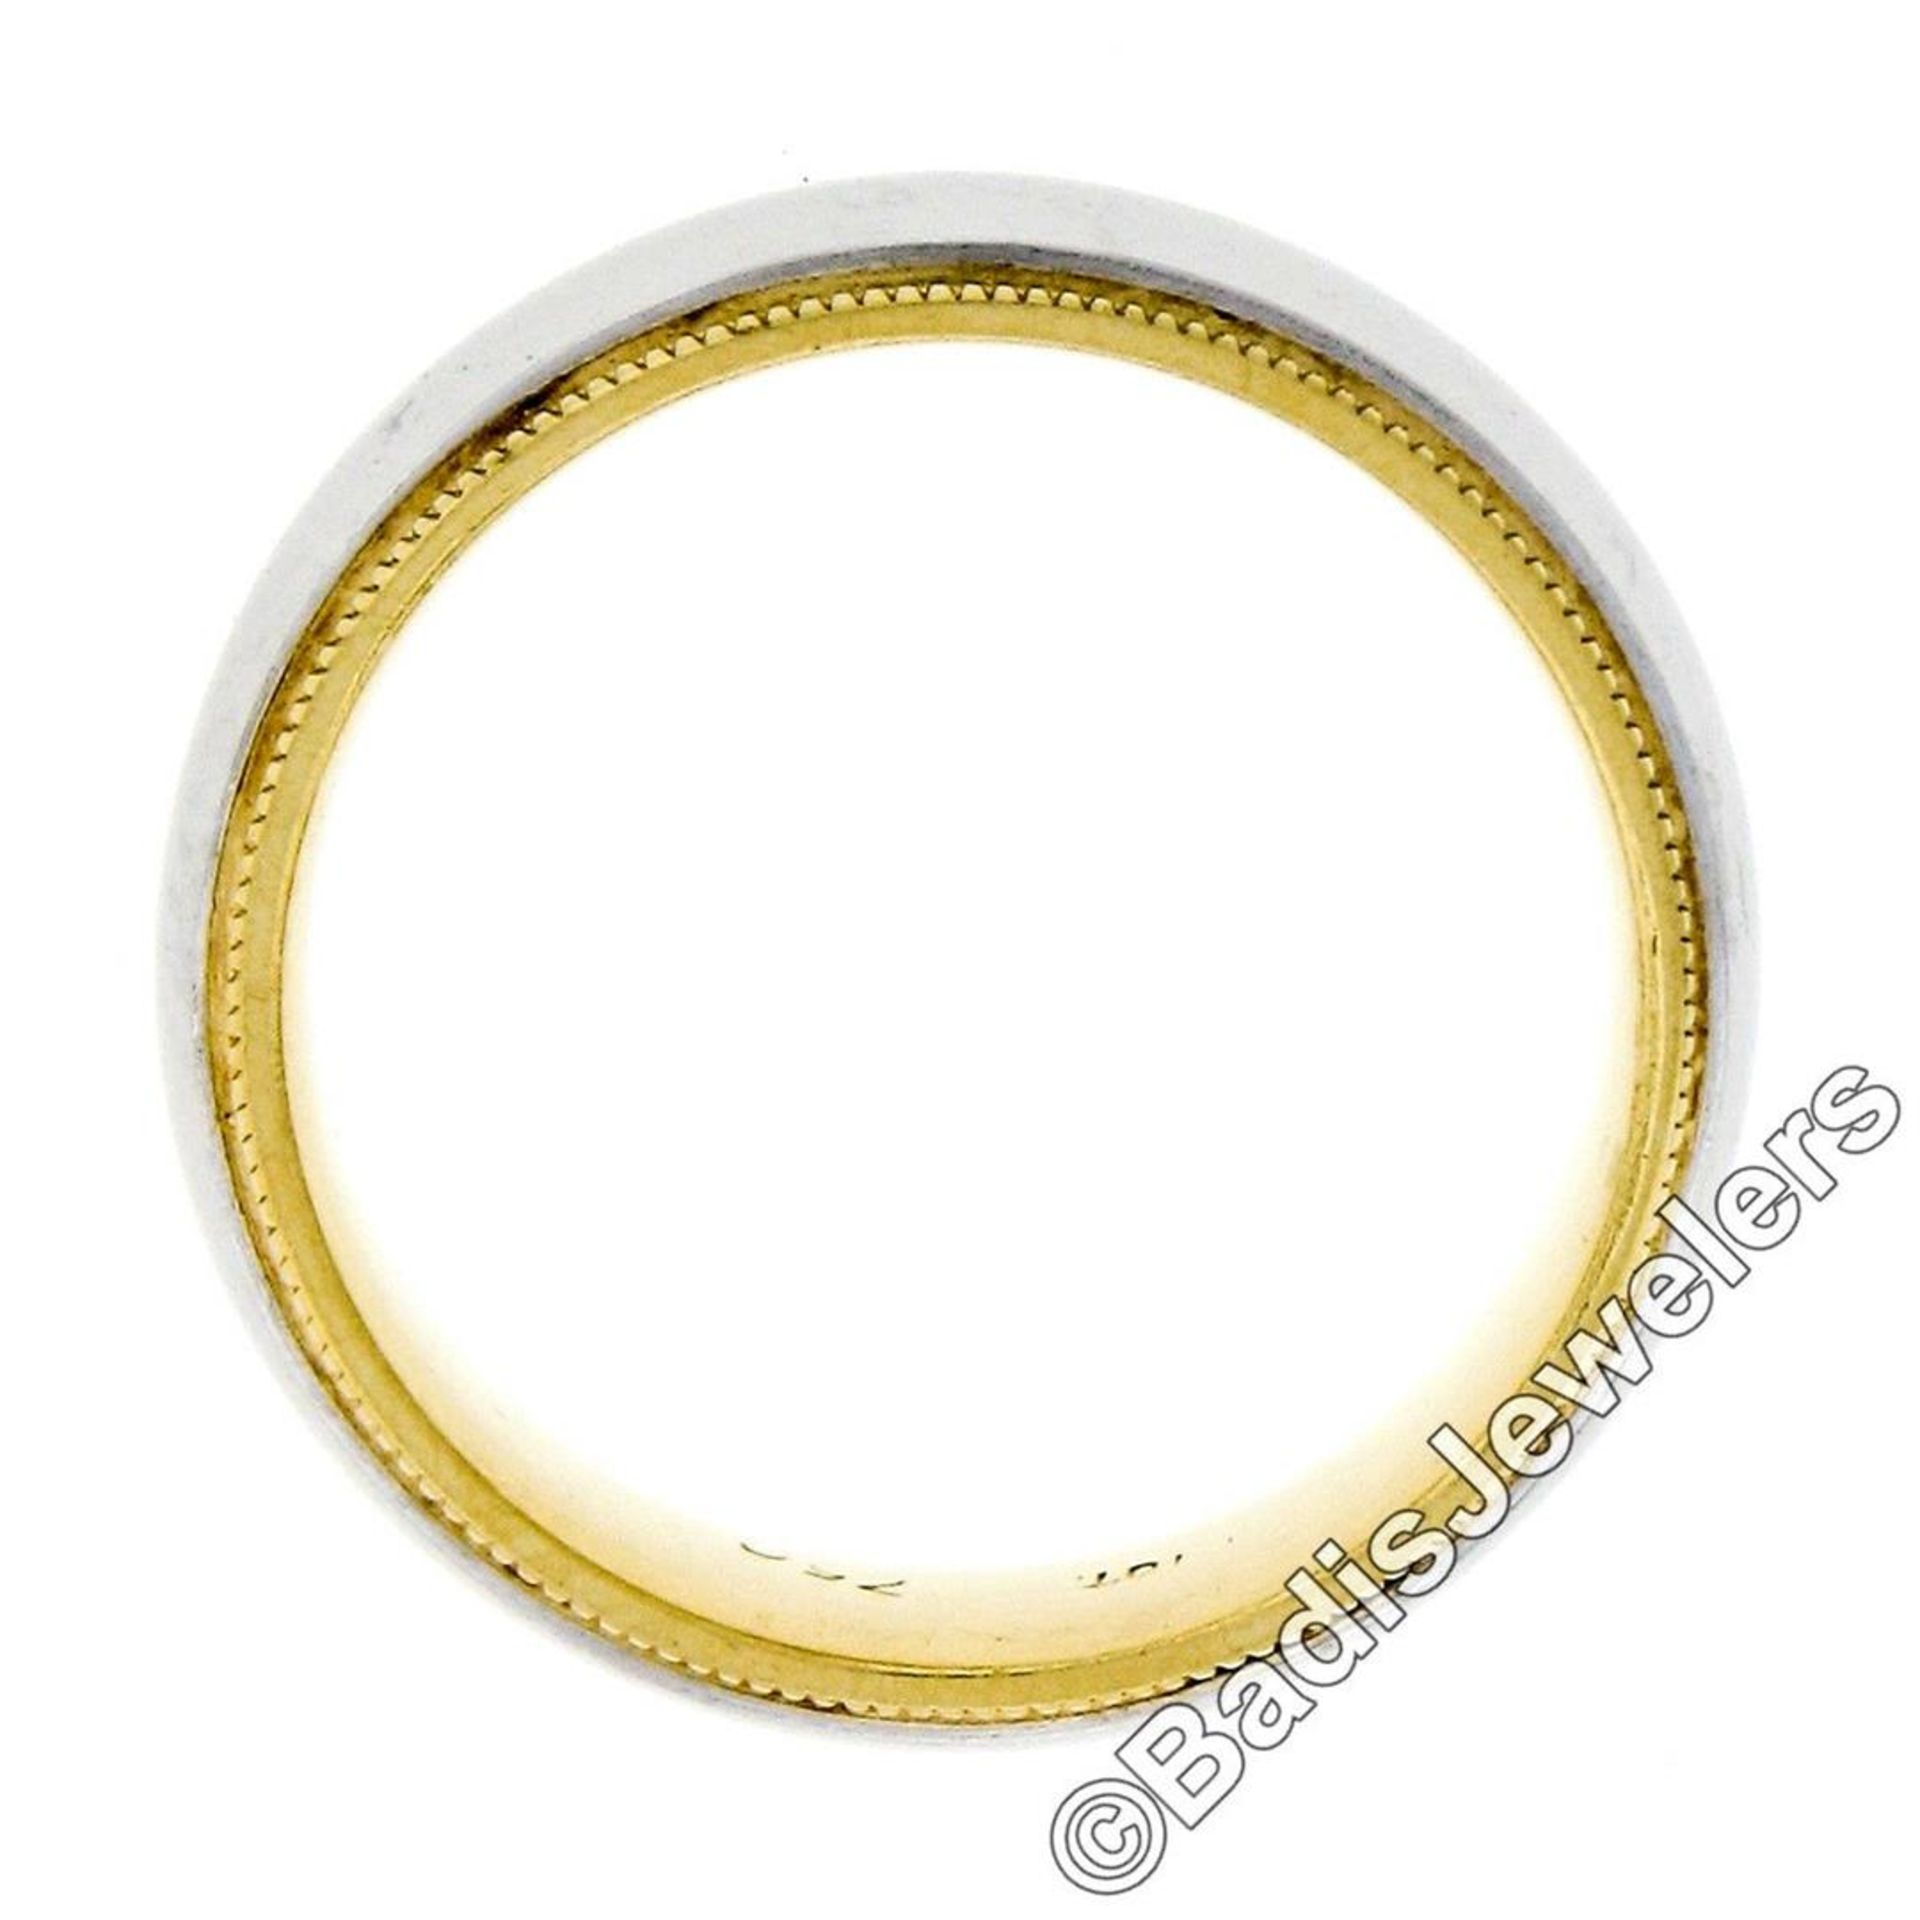 Men's 18kt White and Yellow Gold 5.5mm Milgrain Edged Band Ring - Image 6 of 7